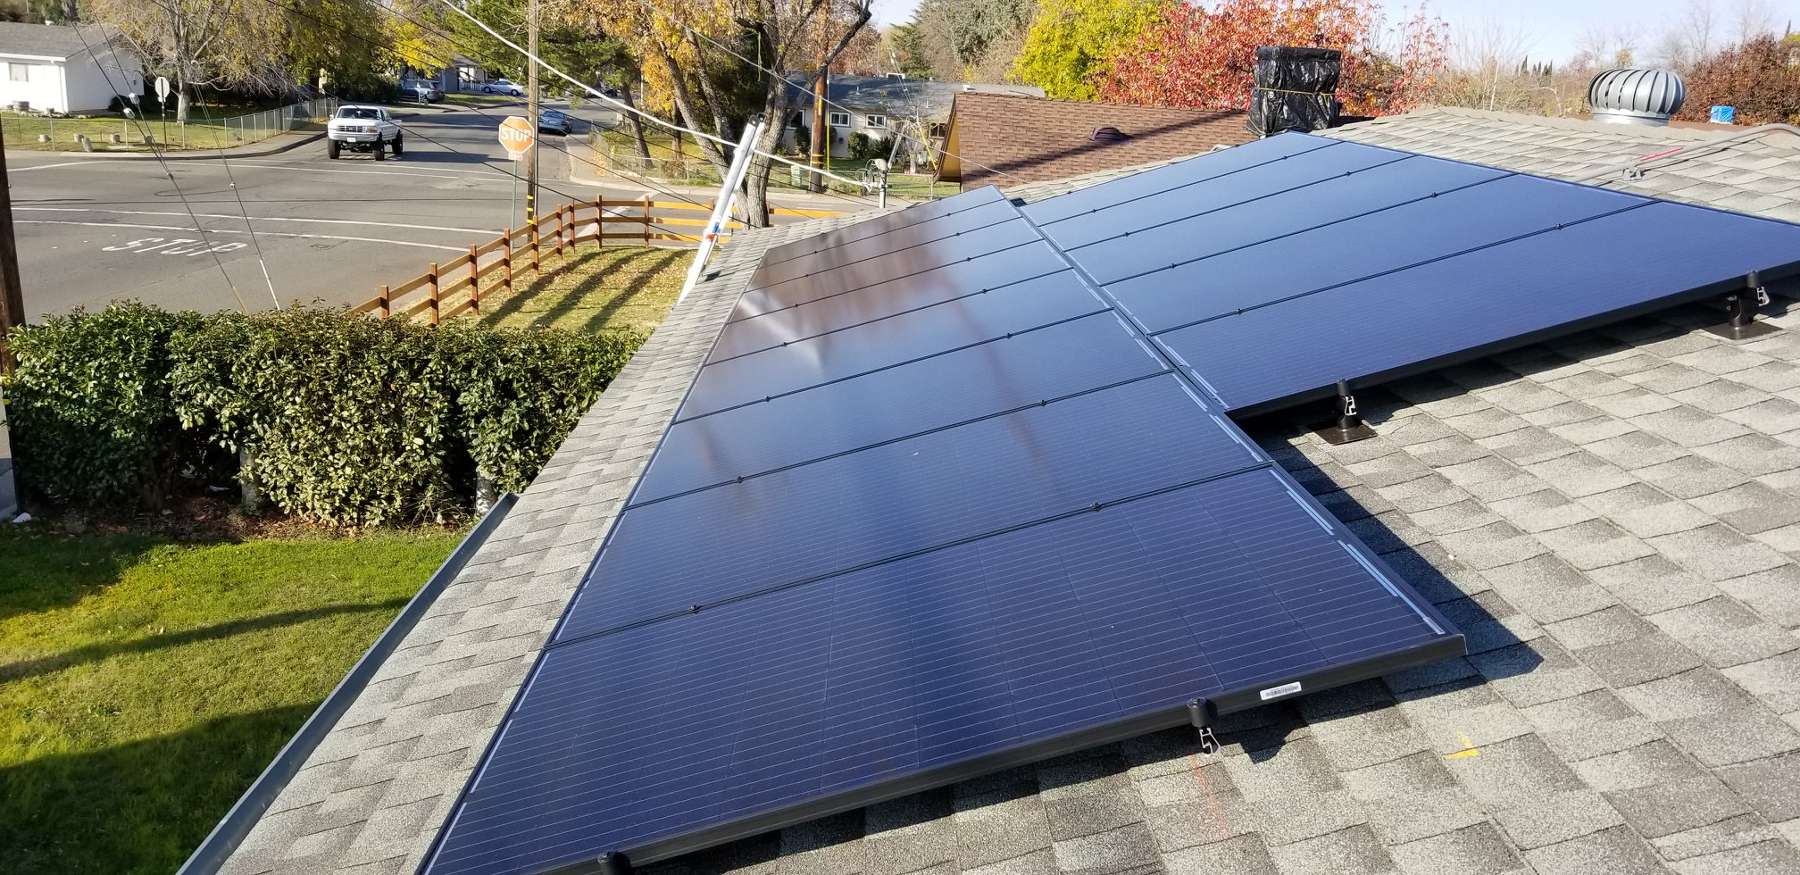 Residential solar panels mounted to a roof.